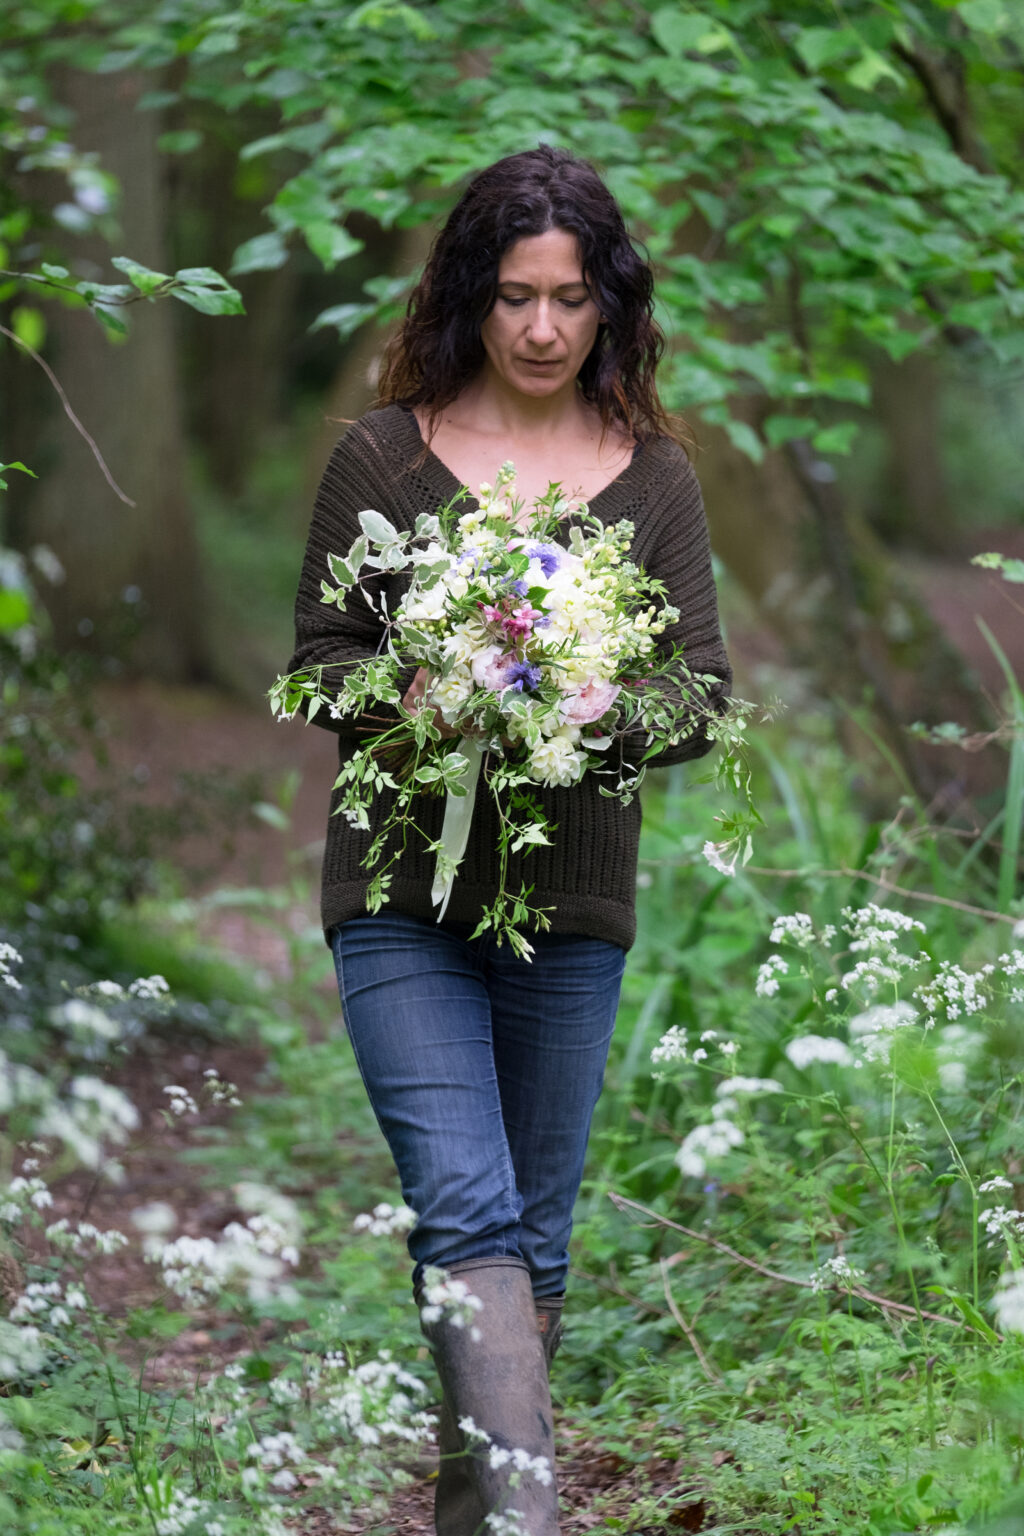 Emma de Sousa, Urban Flower Farmer walks along a grassy path, surrounded by hedges and greenery, holding a seasonal wedding bouquet of flowers she has grown in her cutting garden. Photo: Emma Davies Photography.